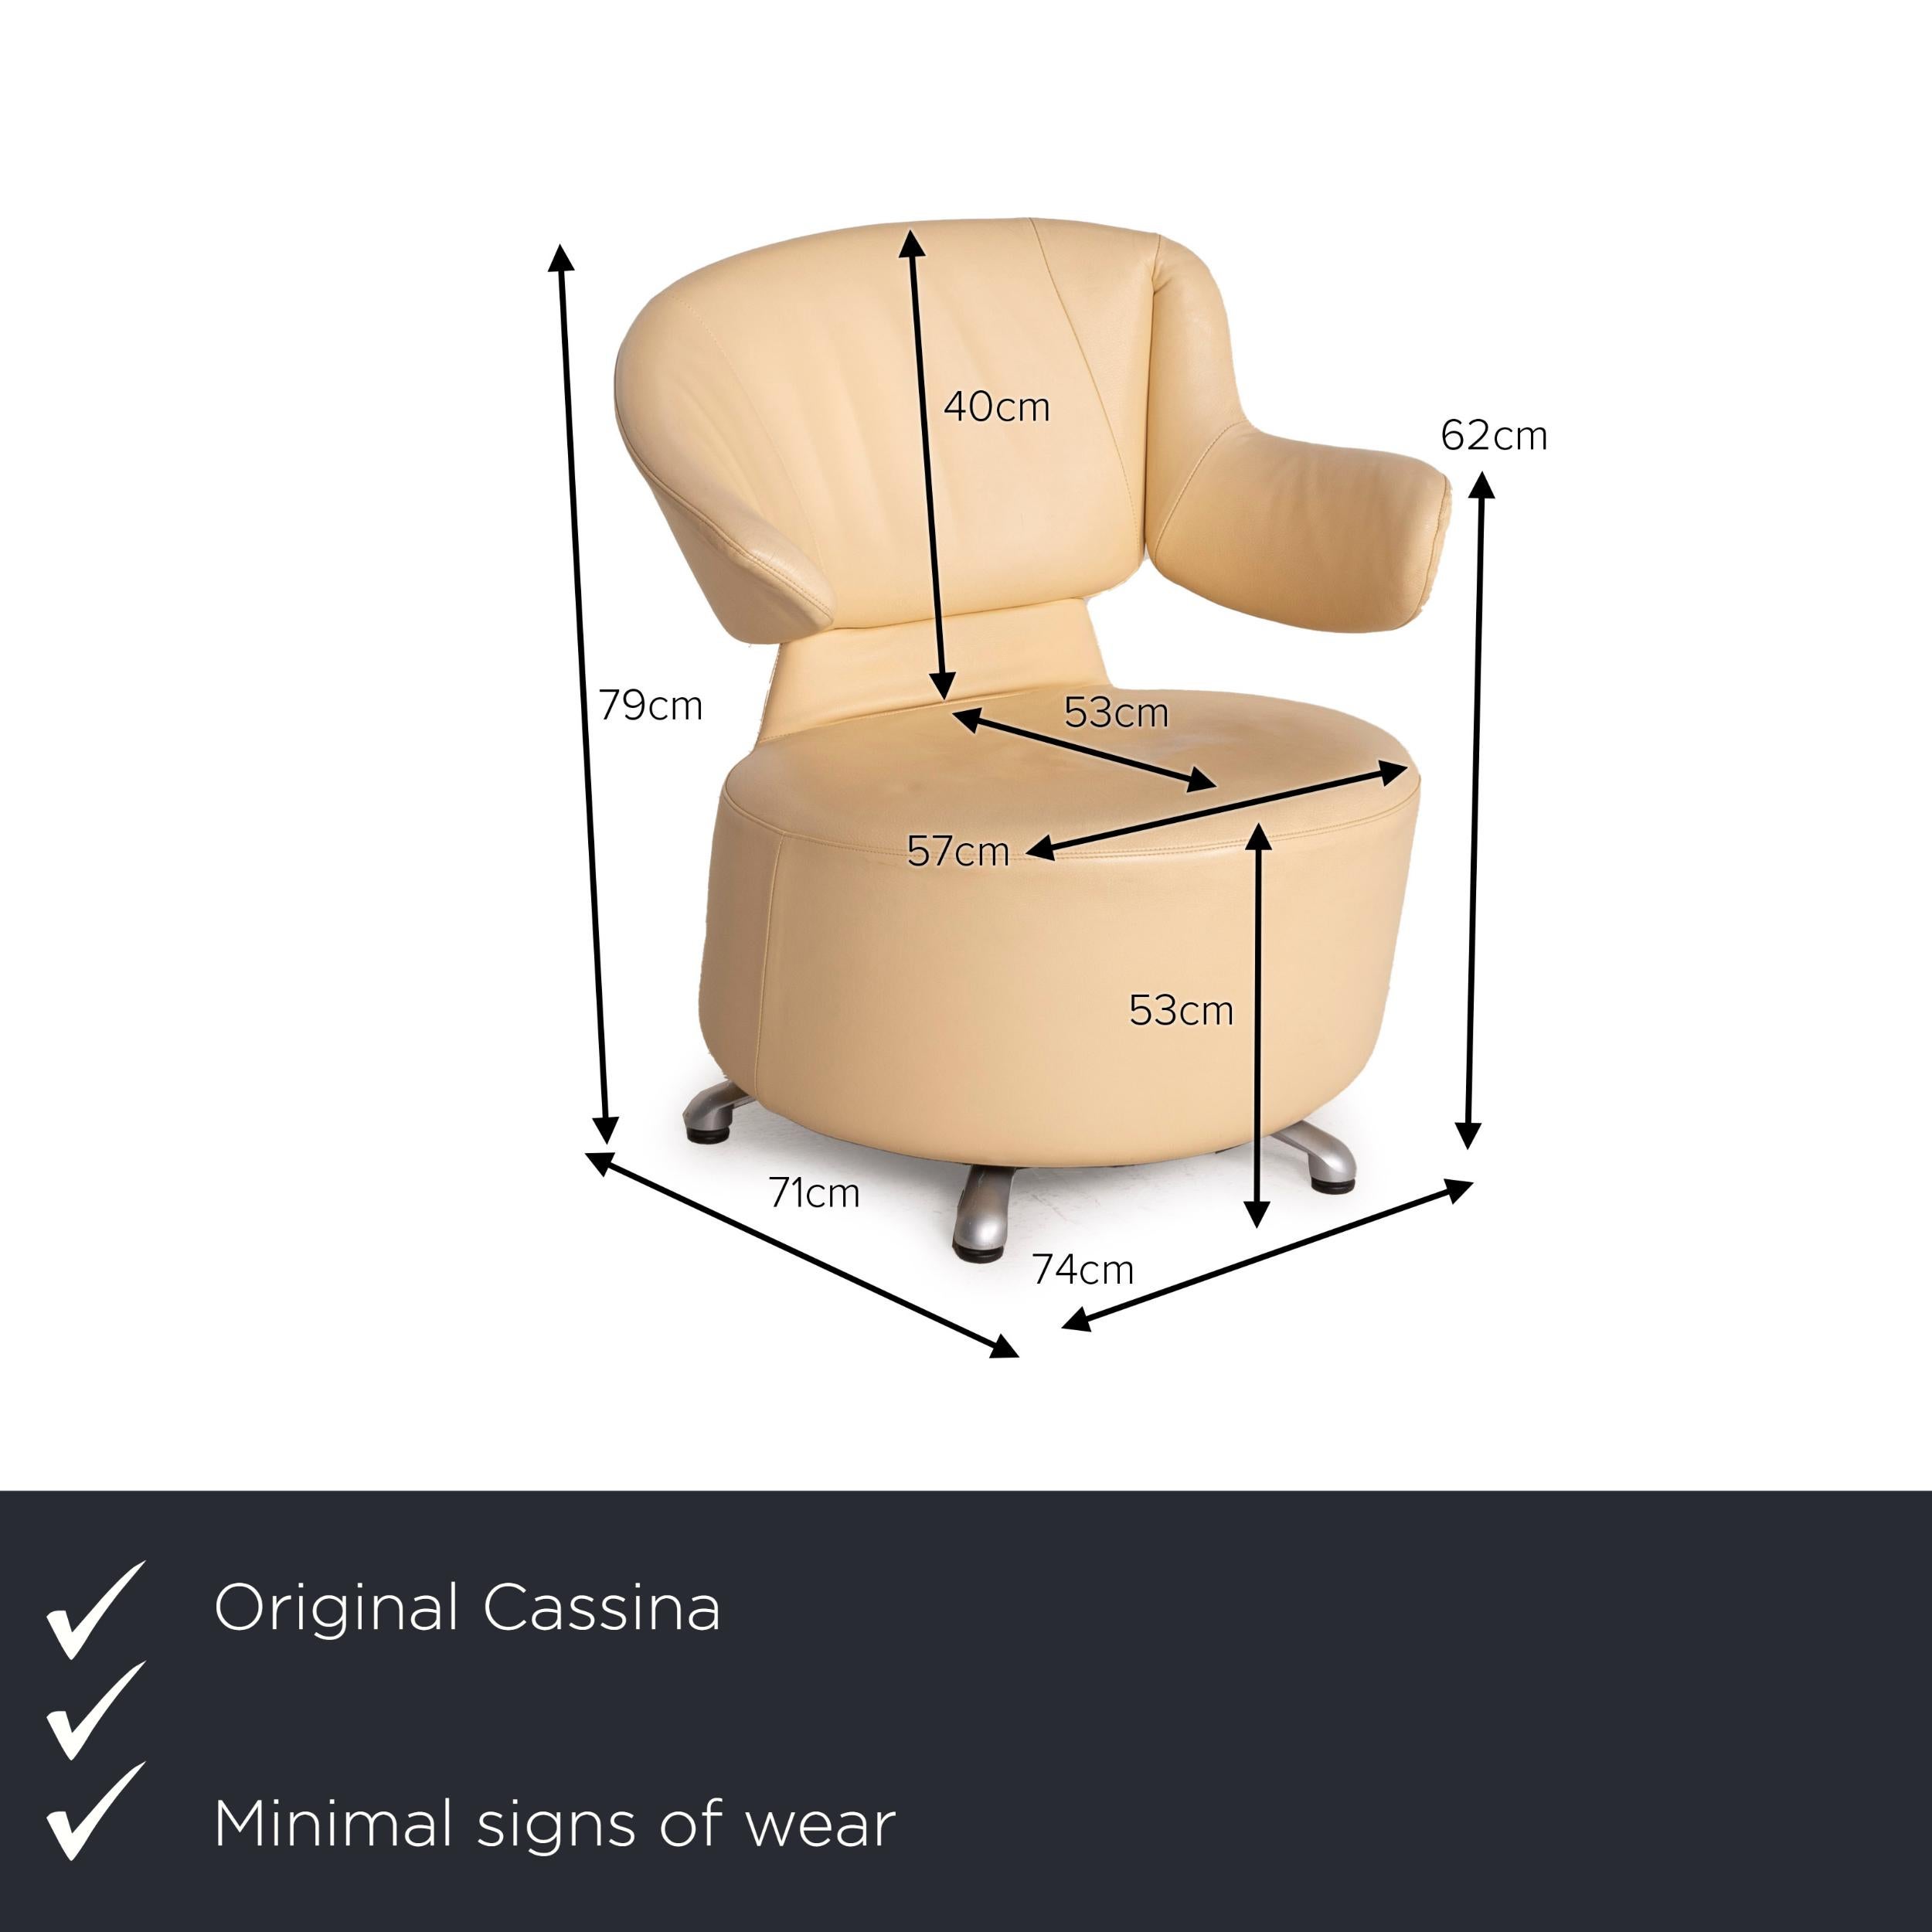 We present to you a Cassina K06 Aki Biki Canta leather armchair set beige set 2x.


 Product measurements in centimeters:
 

Depth: 71
Width: 74
Height: 79
Seat height: 53
Rest height: 62
Seat depth: 53
Seat width: 57
Back height: